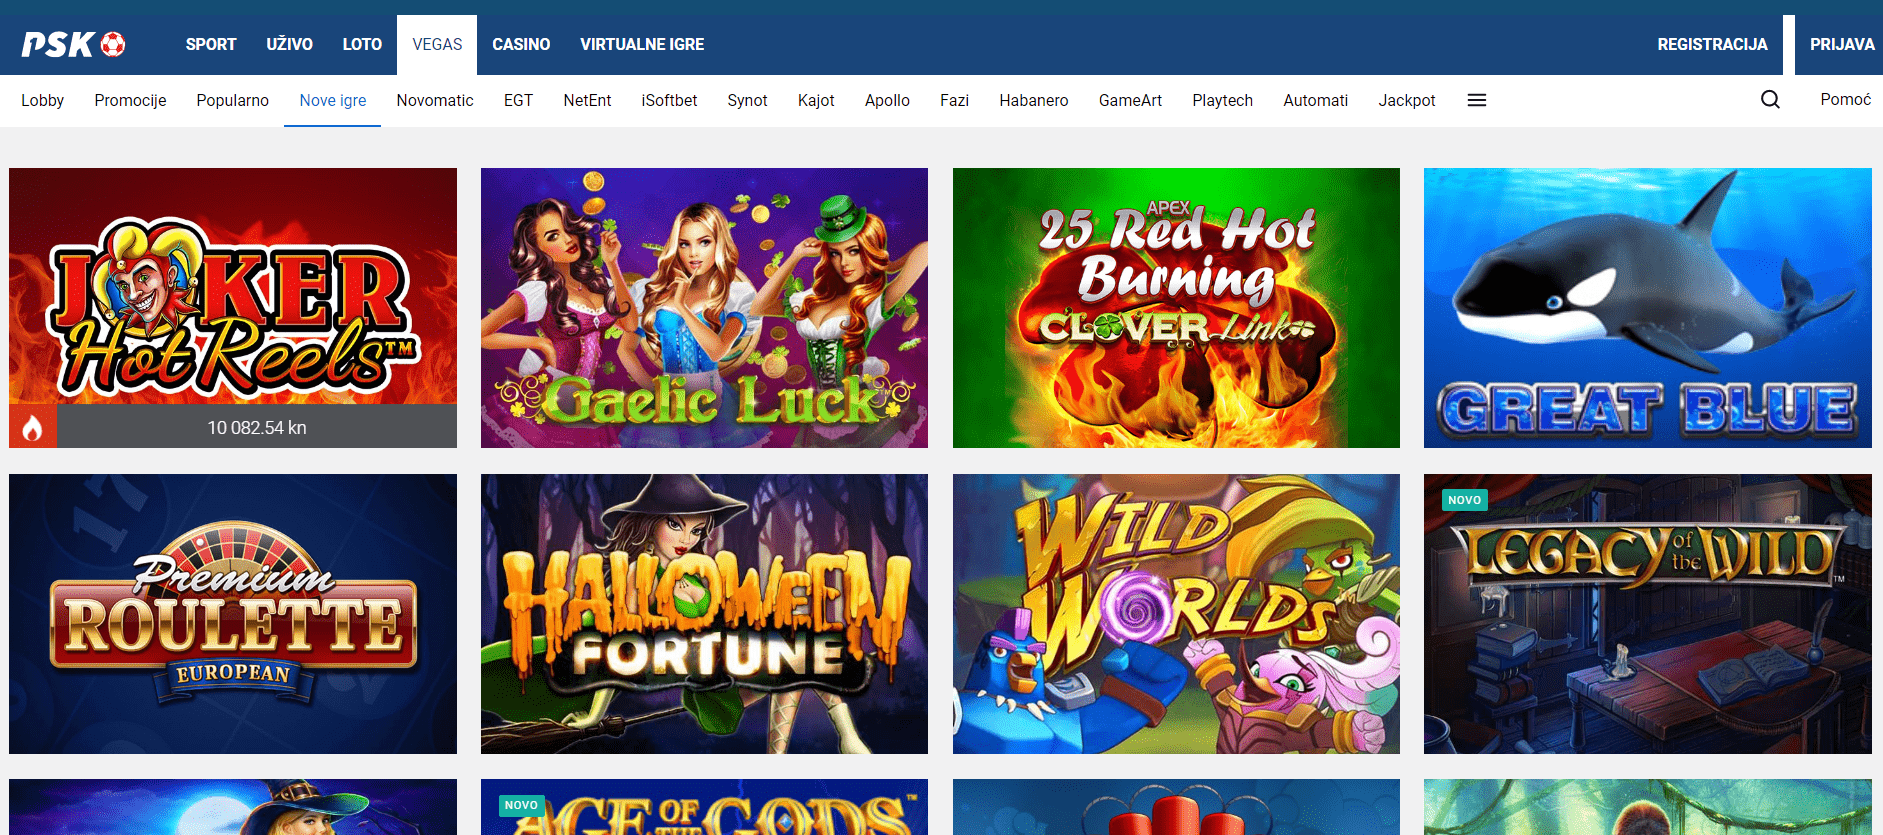 Need More Inspiration With online casino croatia? Read this!